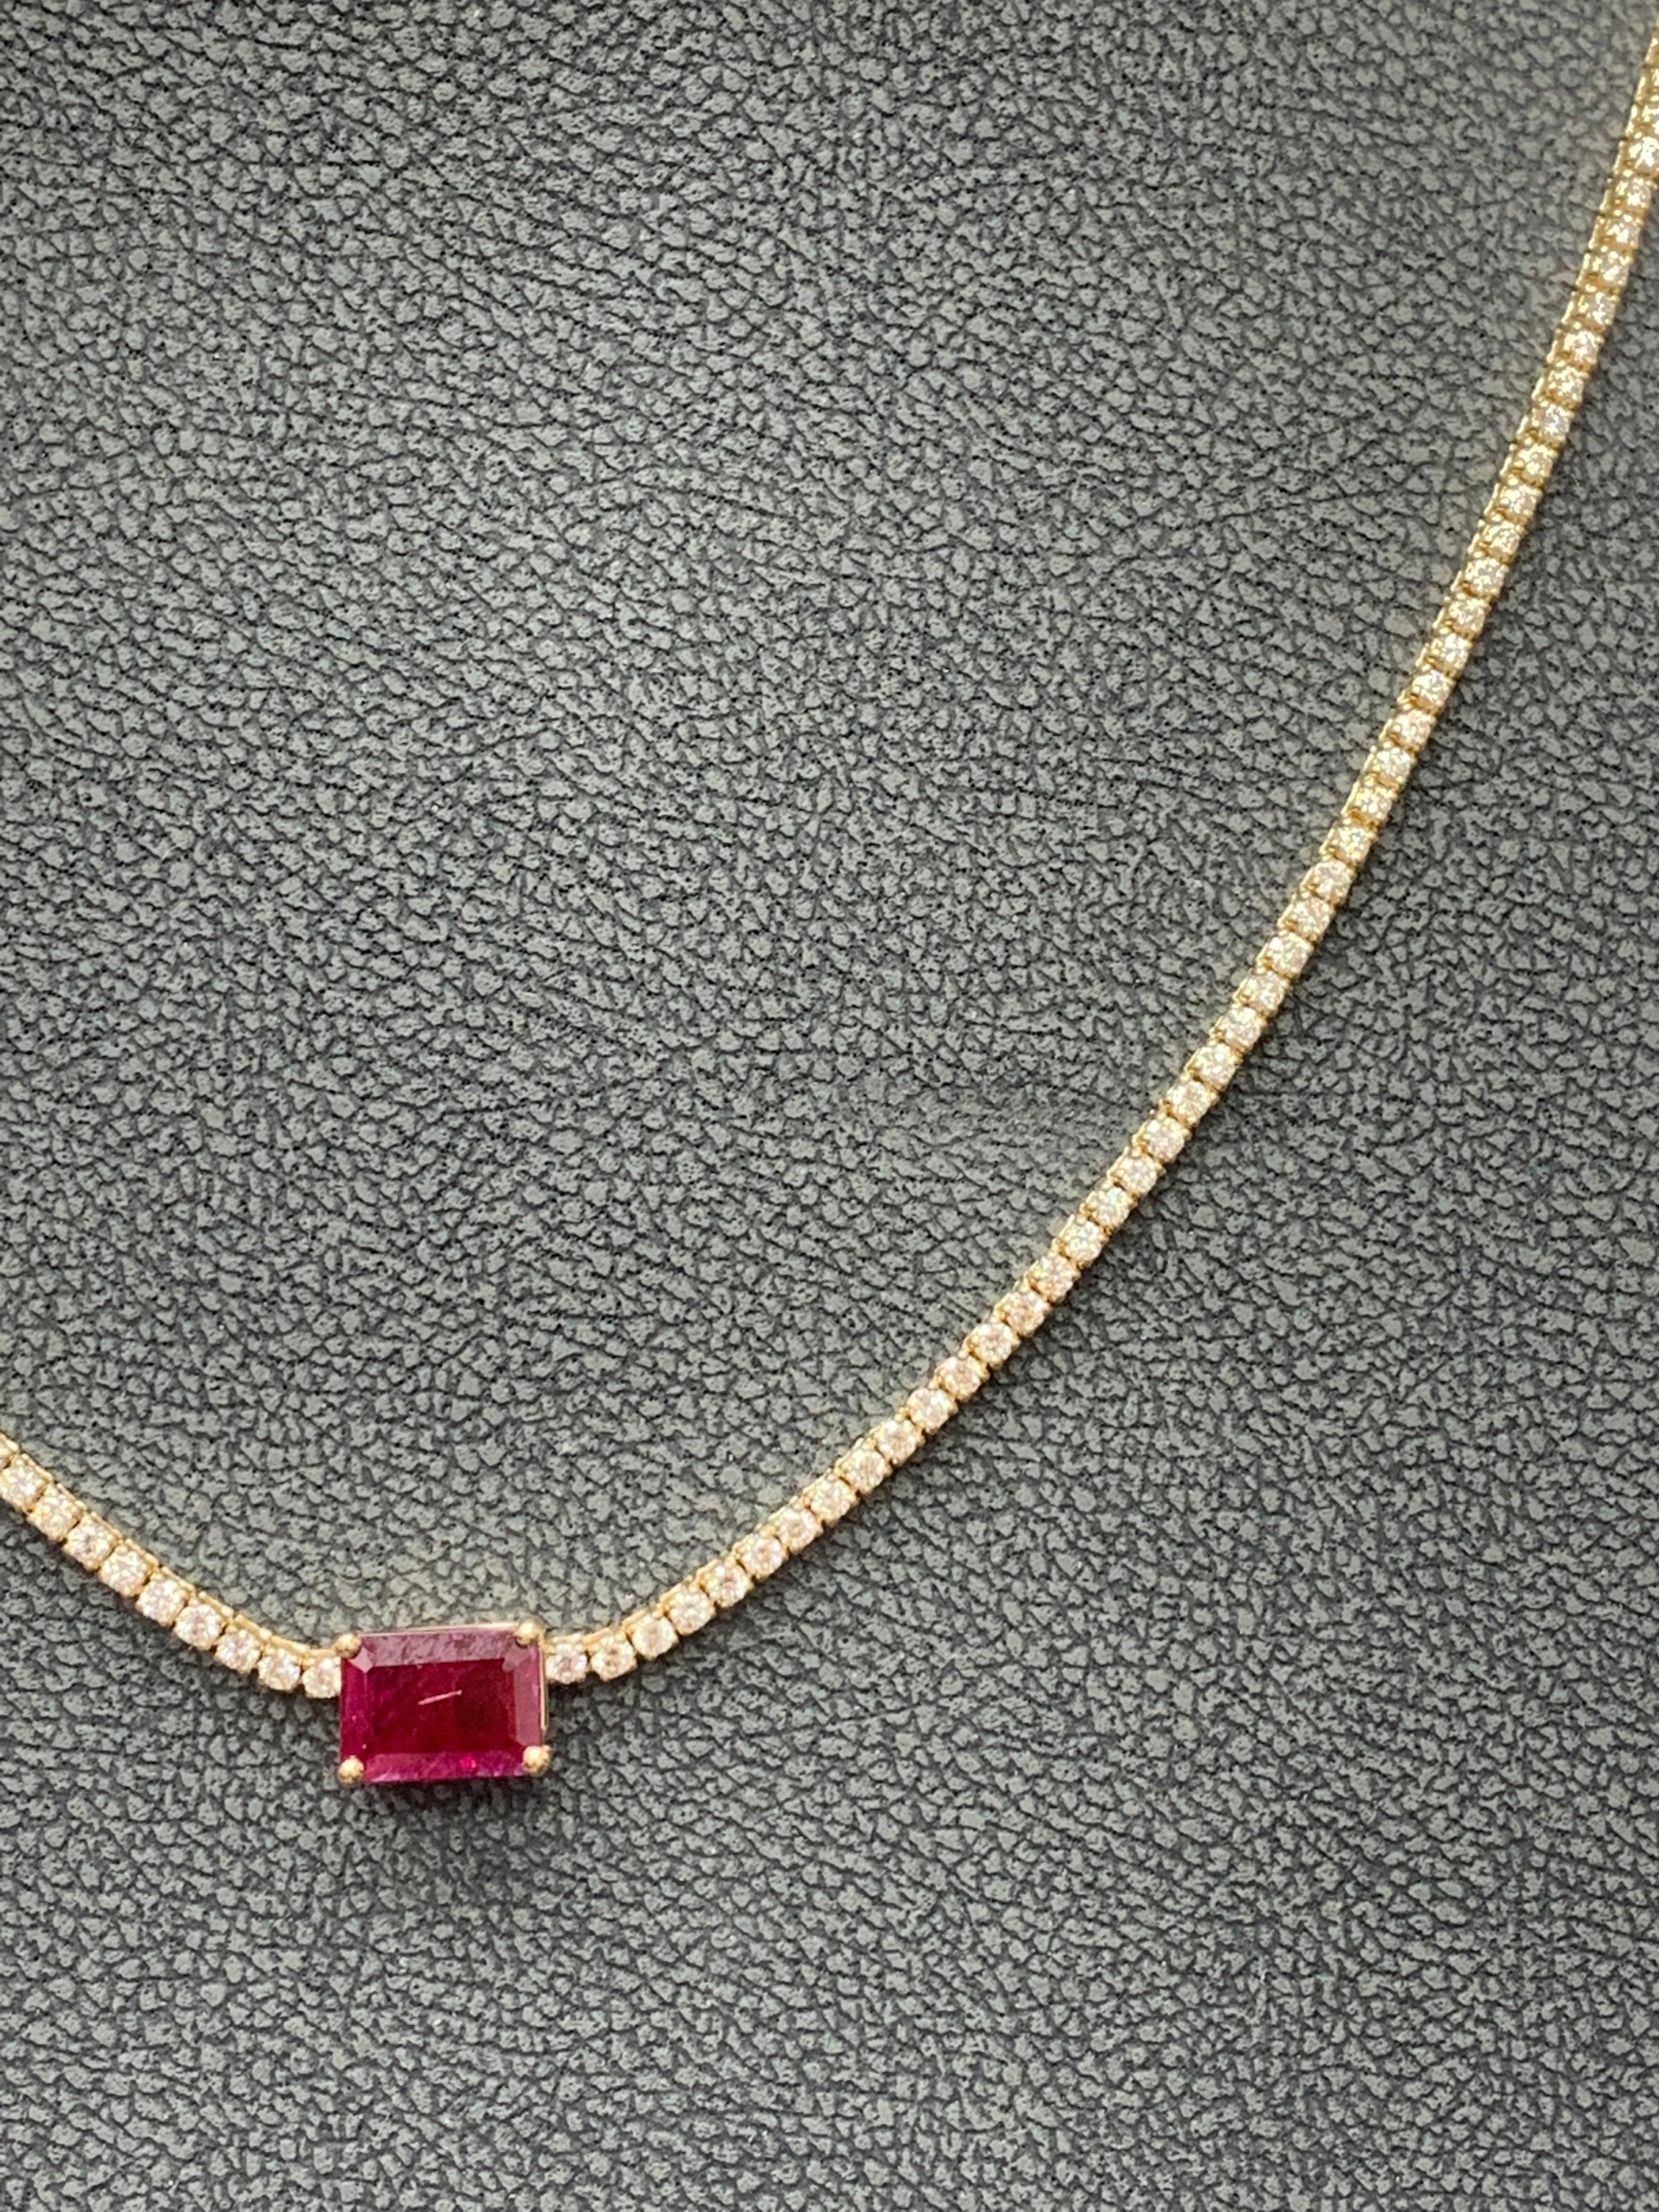 1.49 Carat Emerald Cut Ruby and Diamond Tennis Necklace in 14K Yellow Gold For Sale 1